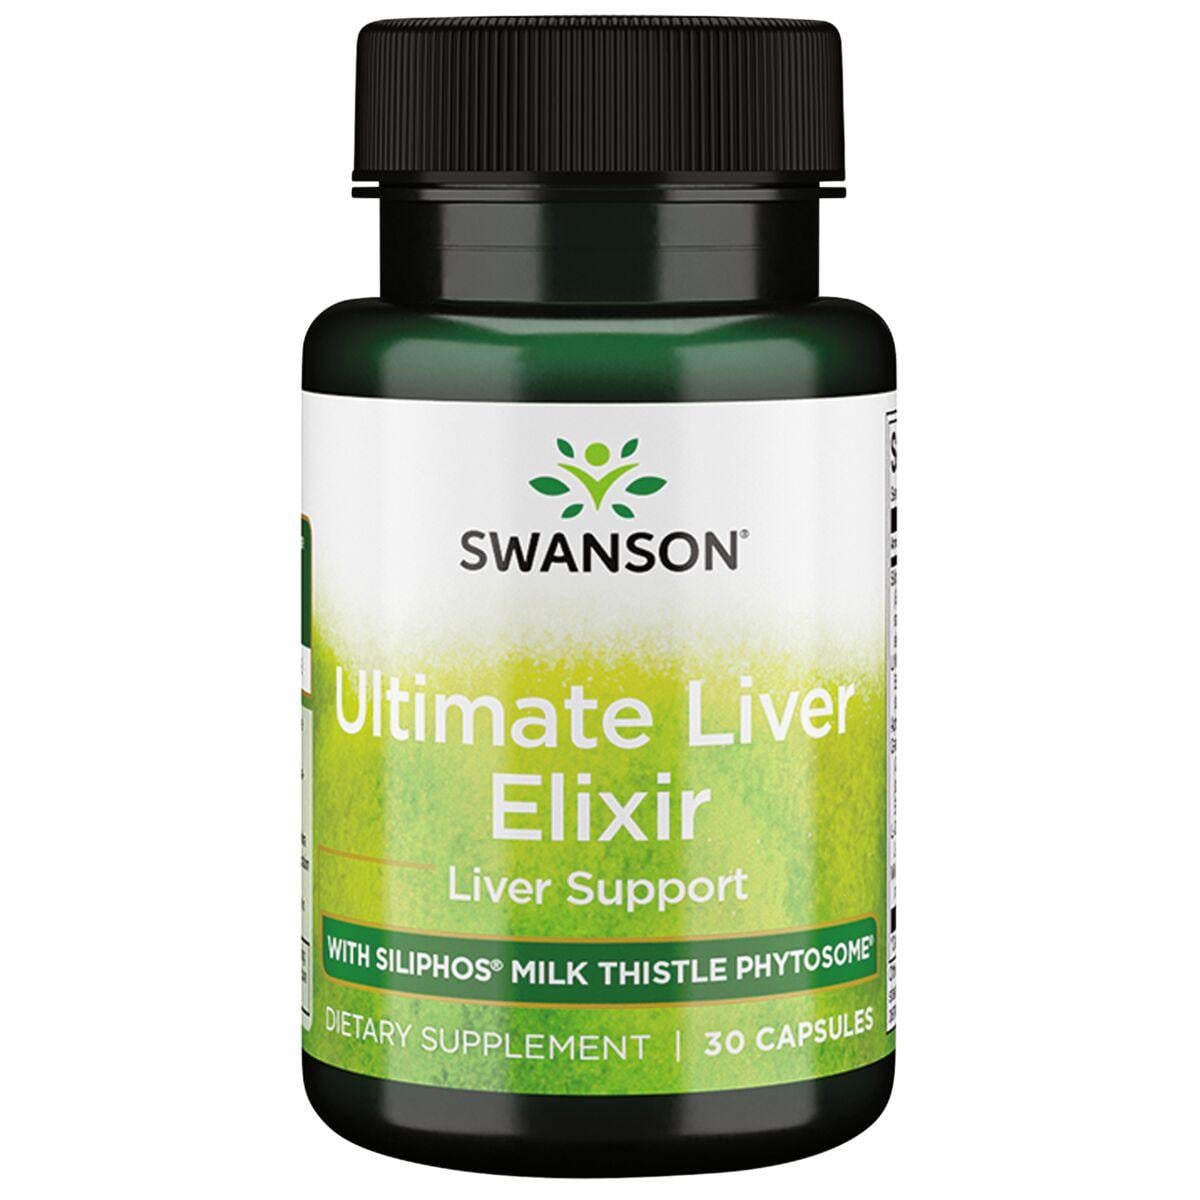 Swanson Ultra Ultimate Liver Elixir with Siliphos Milk Thistle Phytosome Vitamin | 30 Caps